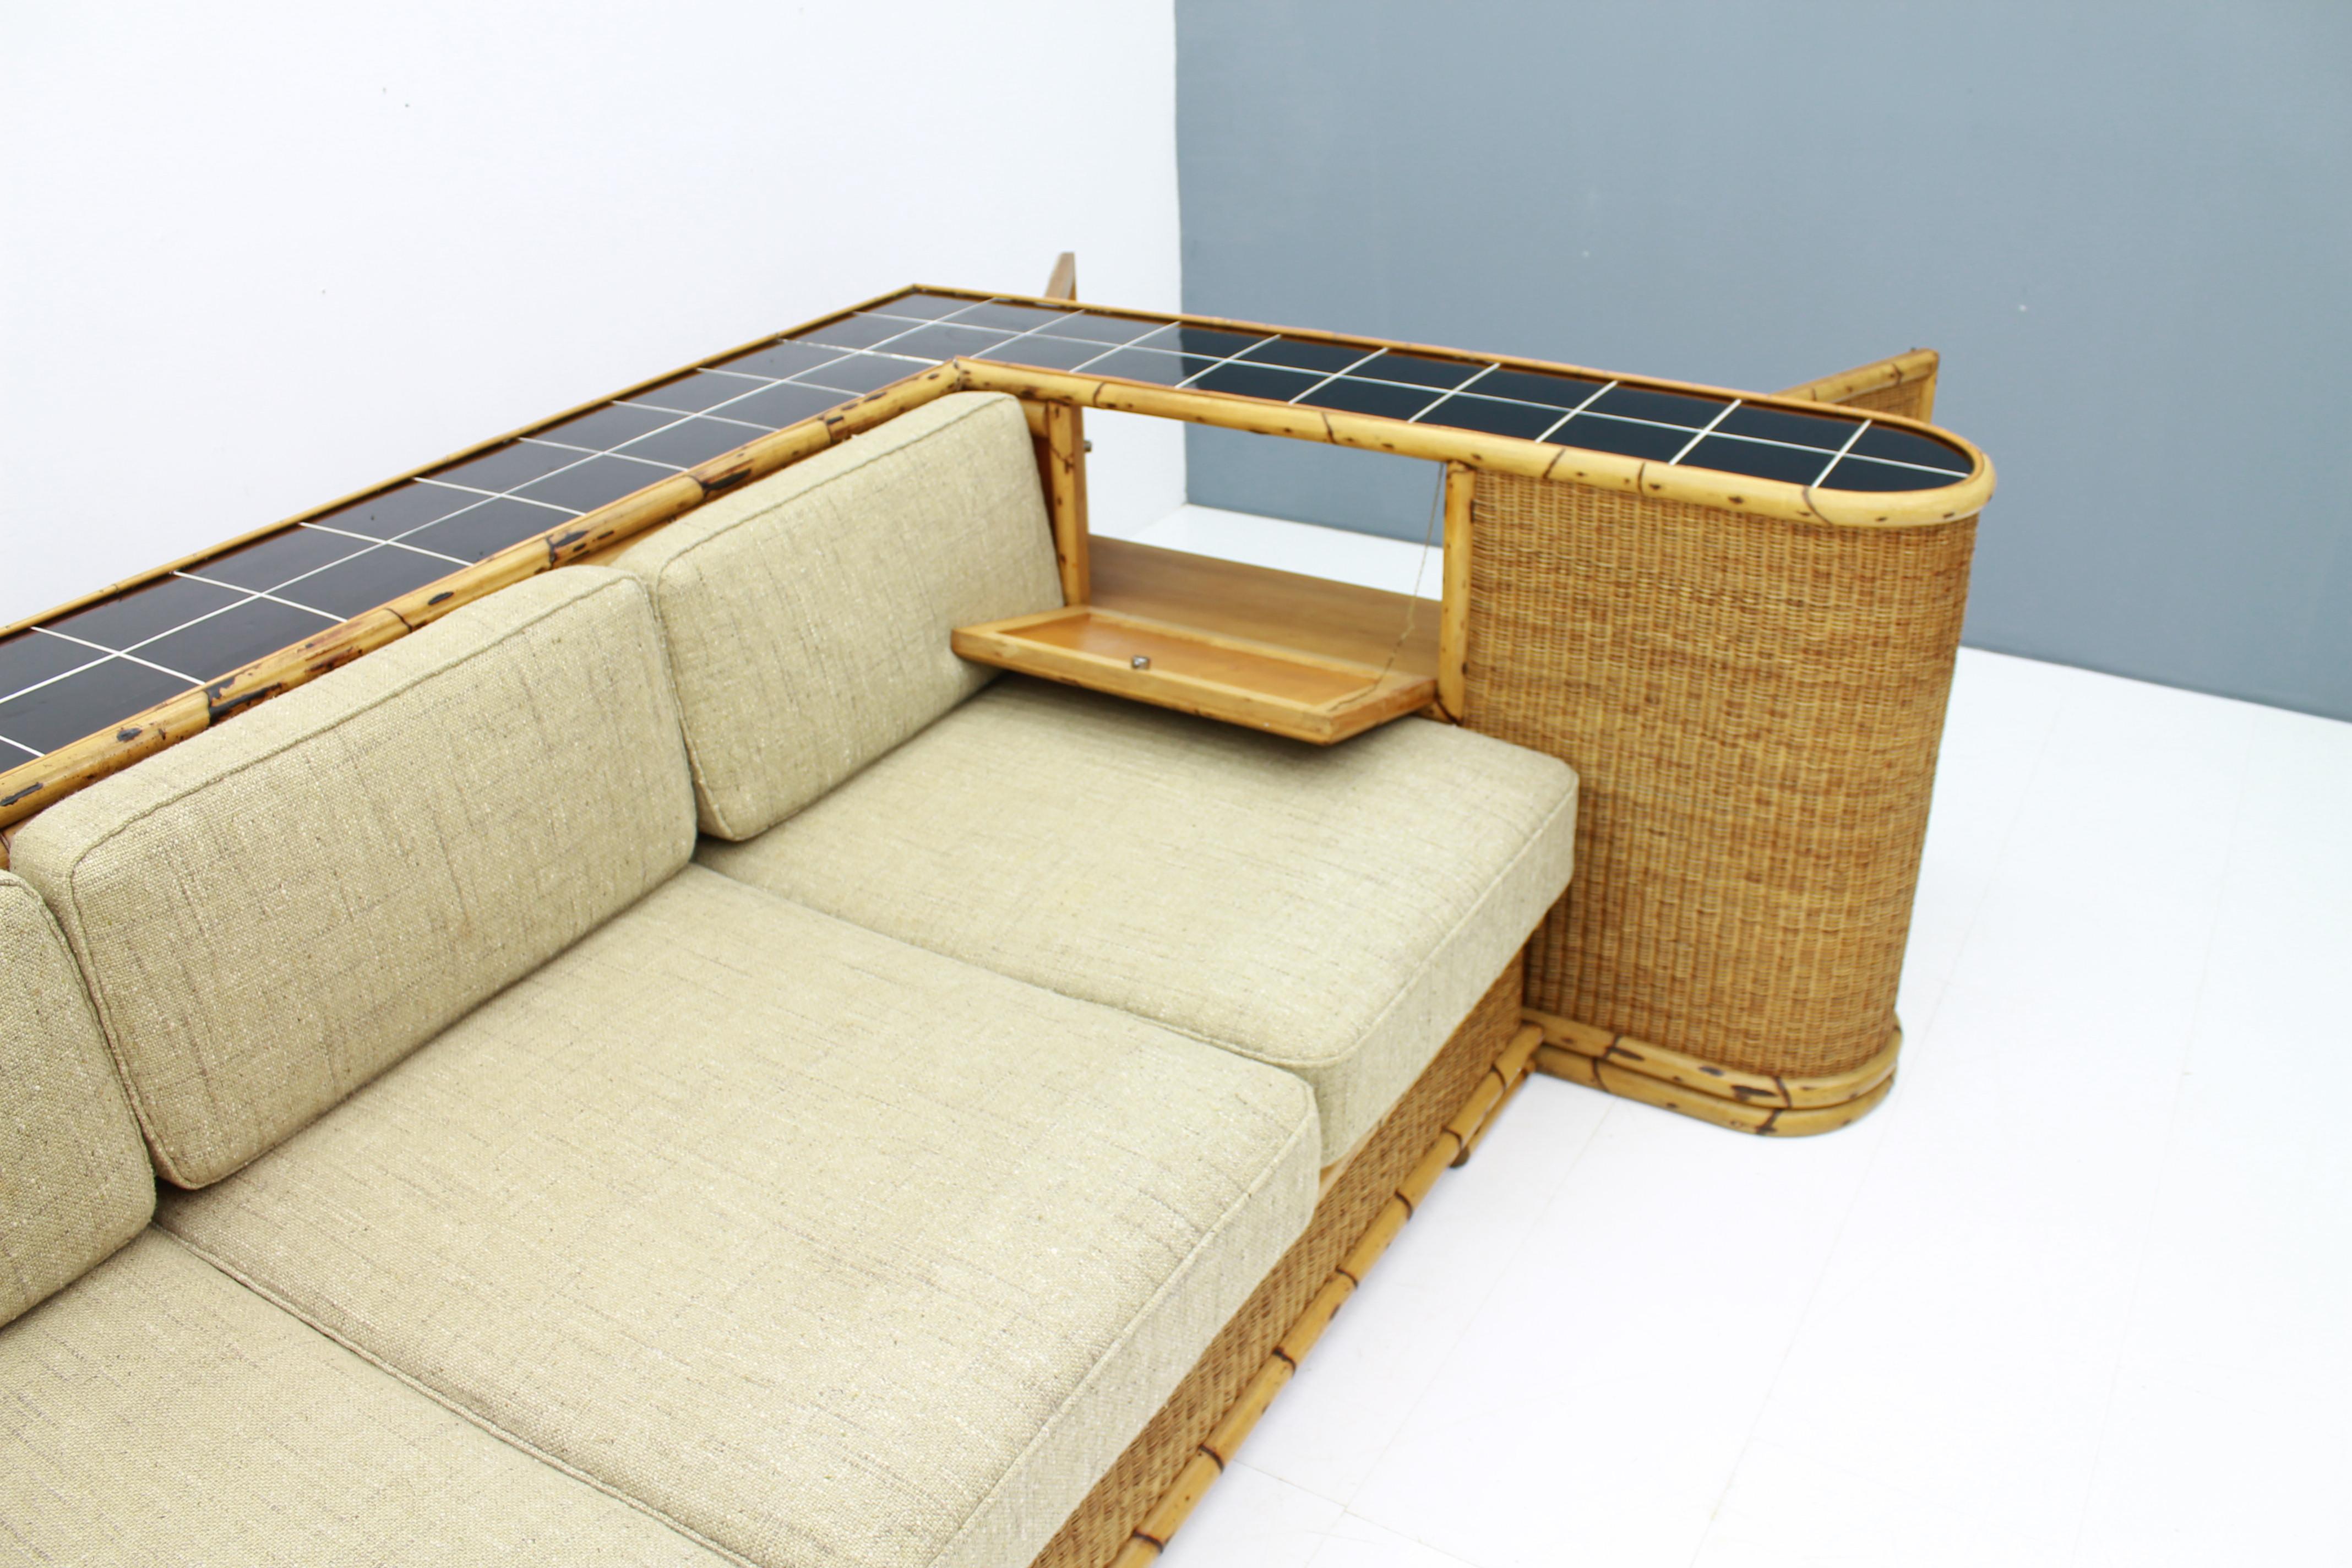 Mid-20th Century Rare Art Deco Bamboo & Rattan Daybed Sofa Room Divider by Arco Germany 1940s